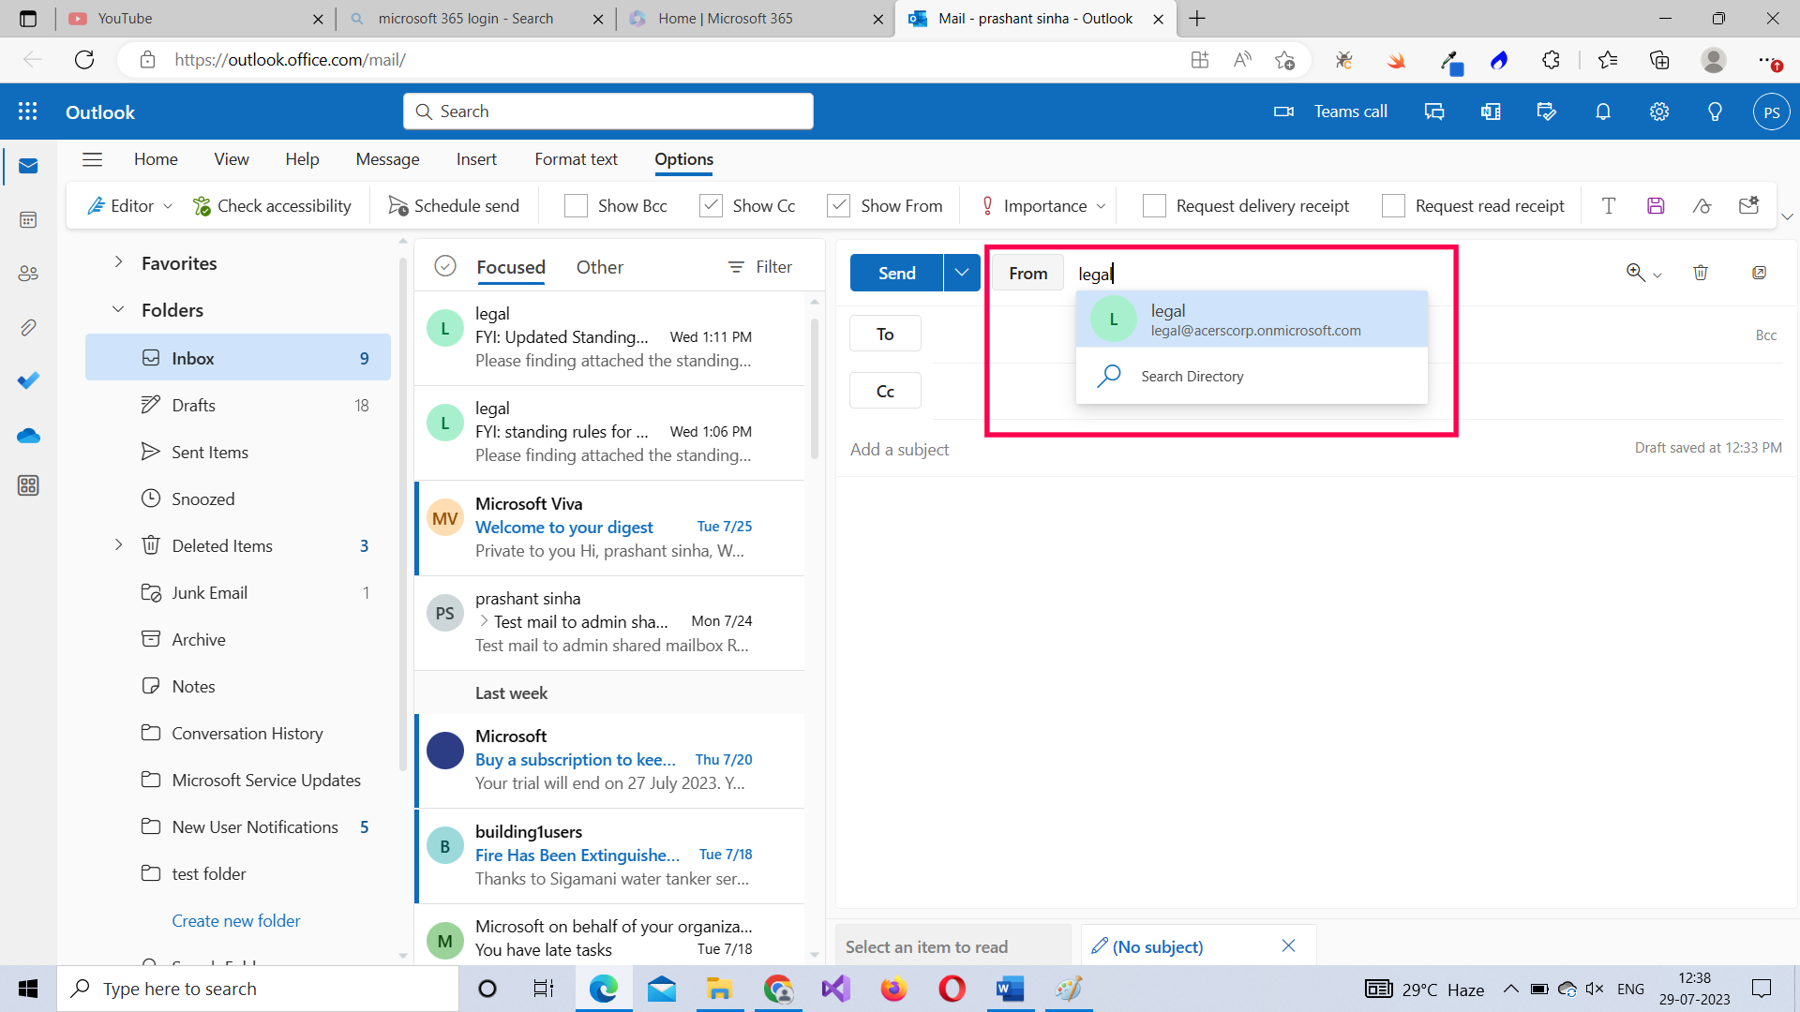 This screenshot shows how you a Microsoft 365 user can search for a shared mailbox email address in the Outlook app.